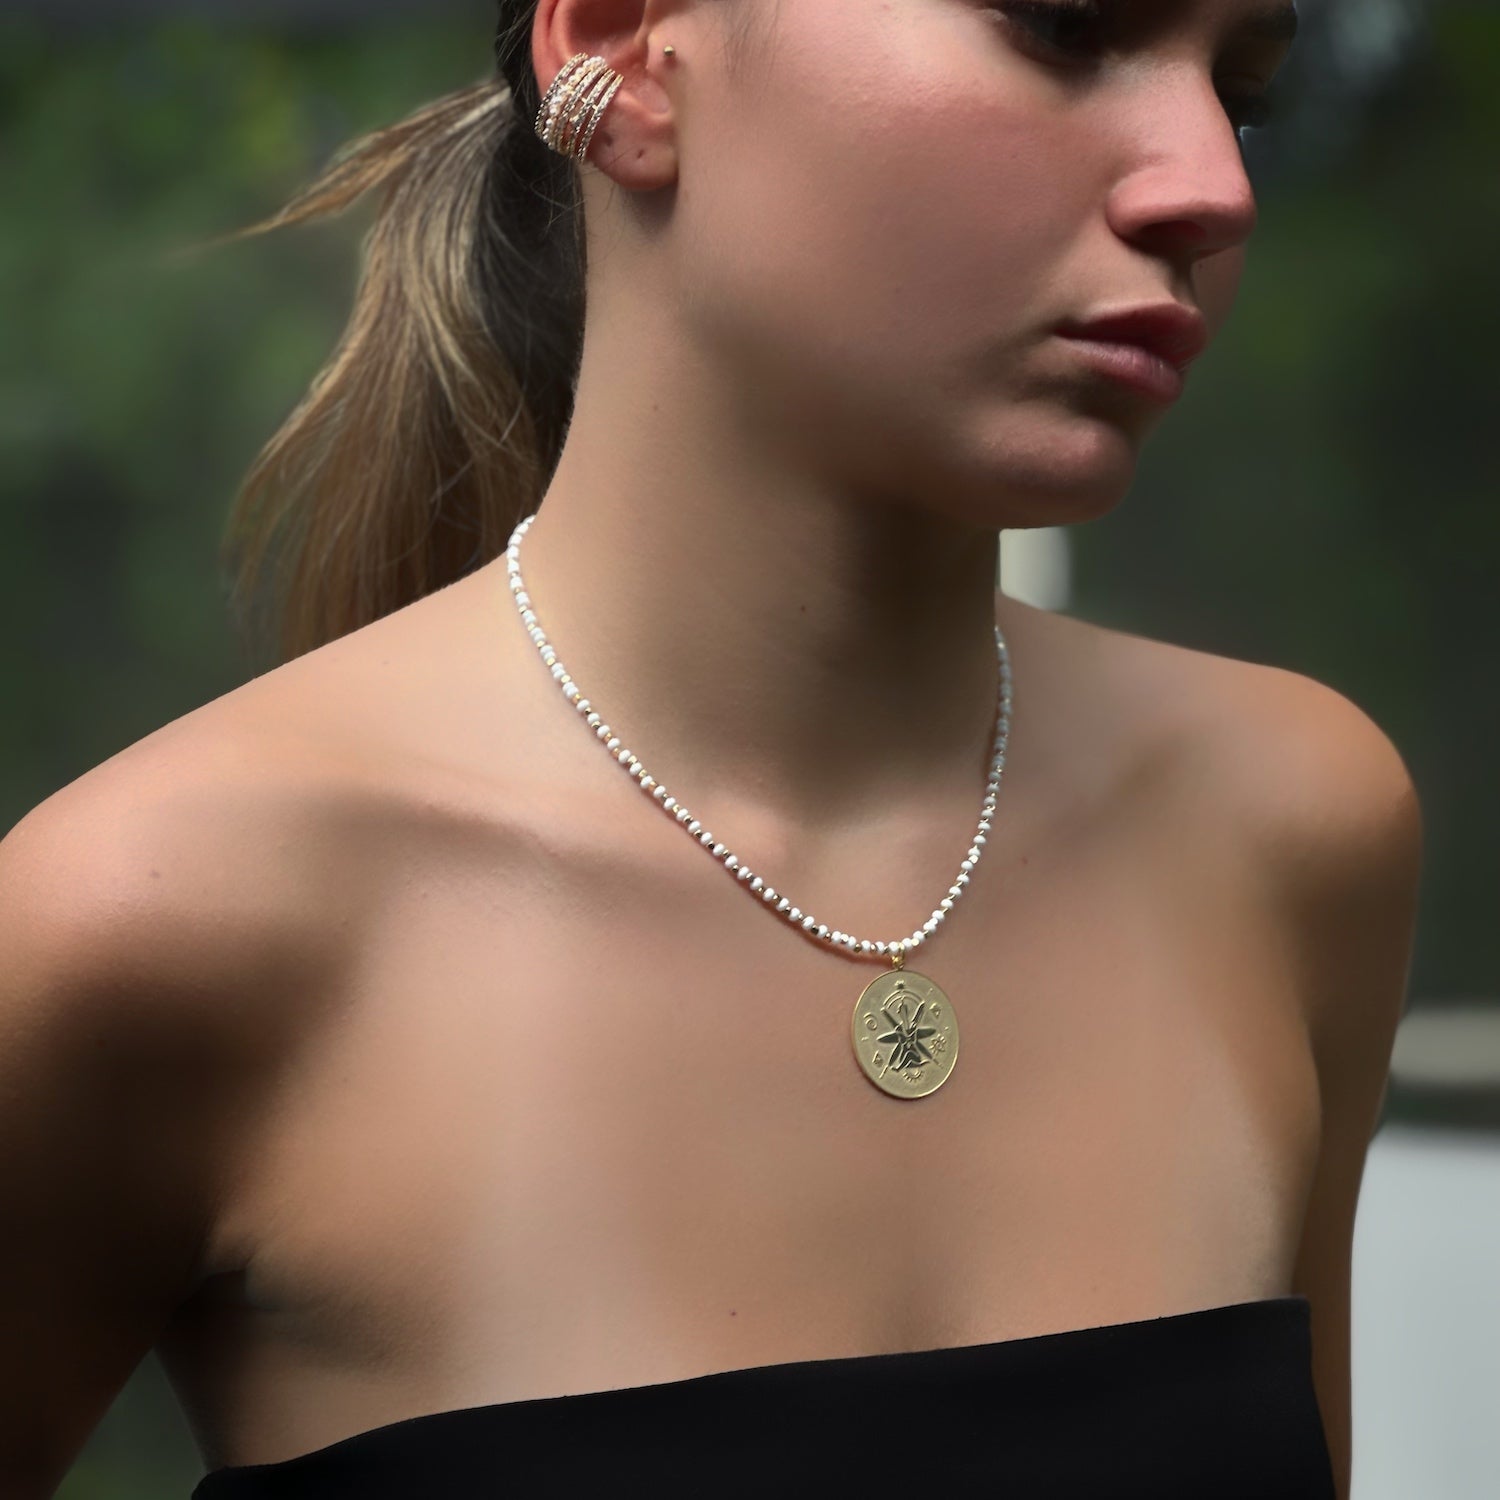 Model Adorns "New Beginning Aura Necklace" - Spirituality and Style.